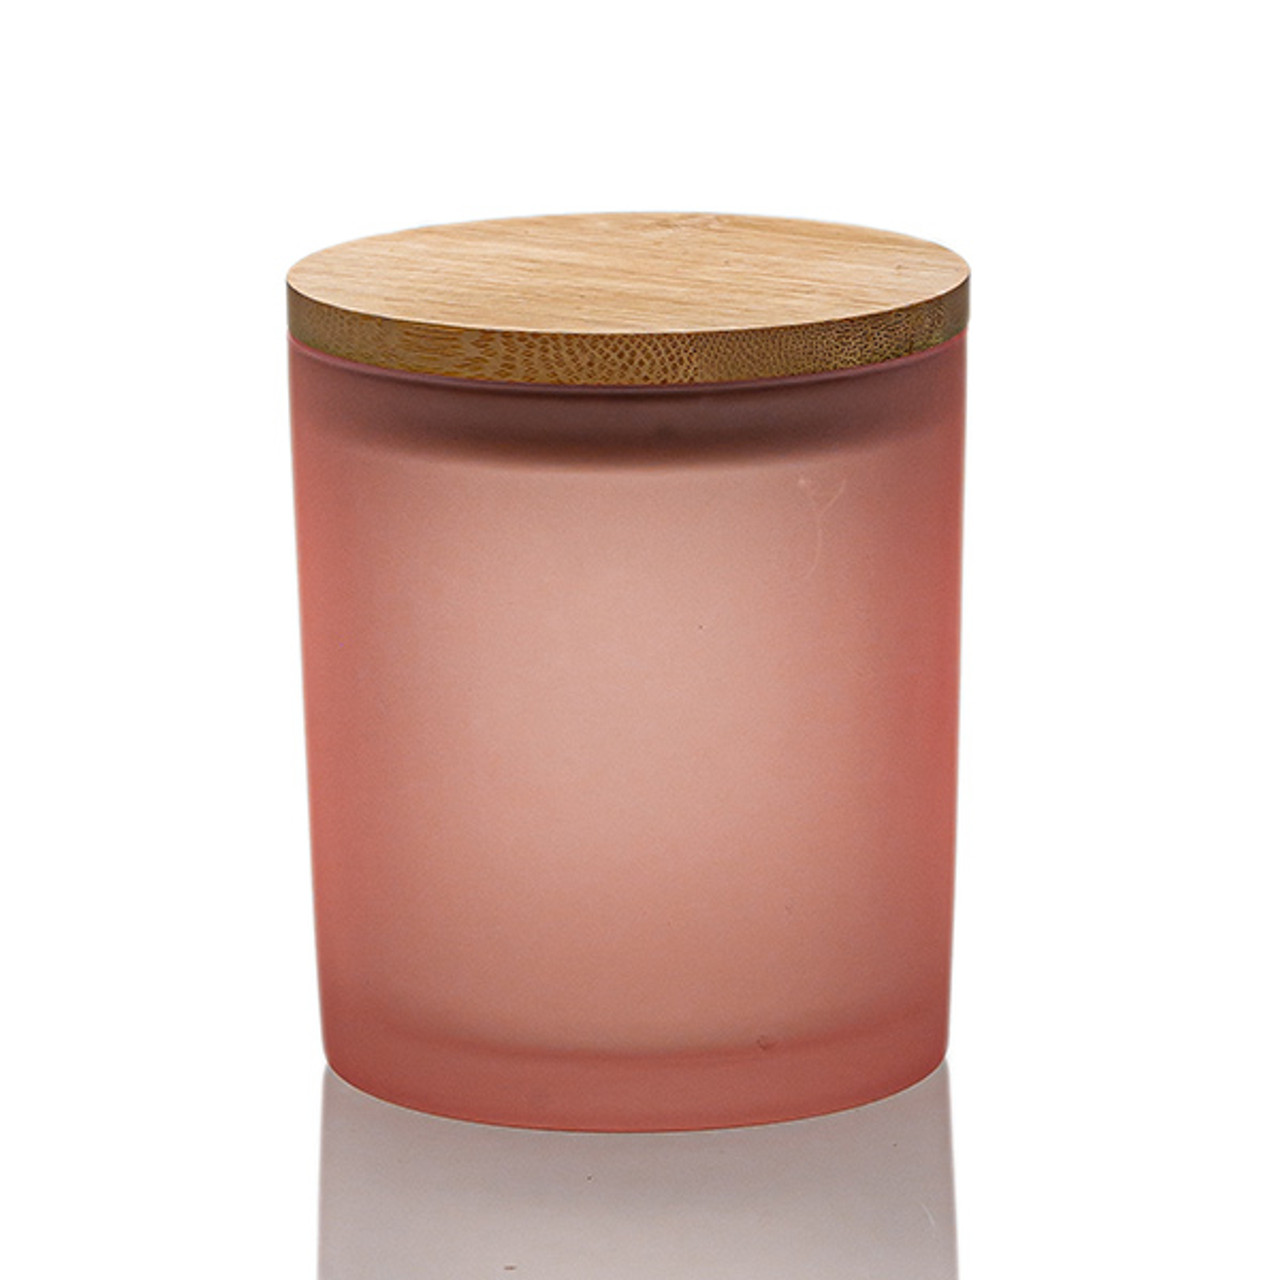 Rose Pink Colored Candle Jar - 14.5 oz with Bamboo Lid